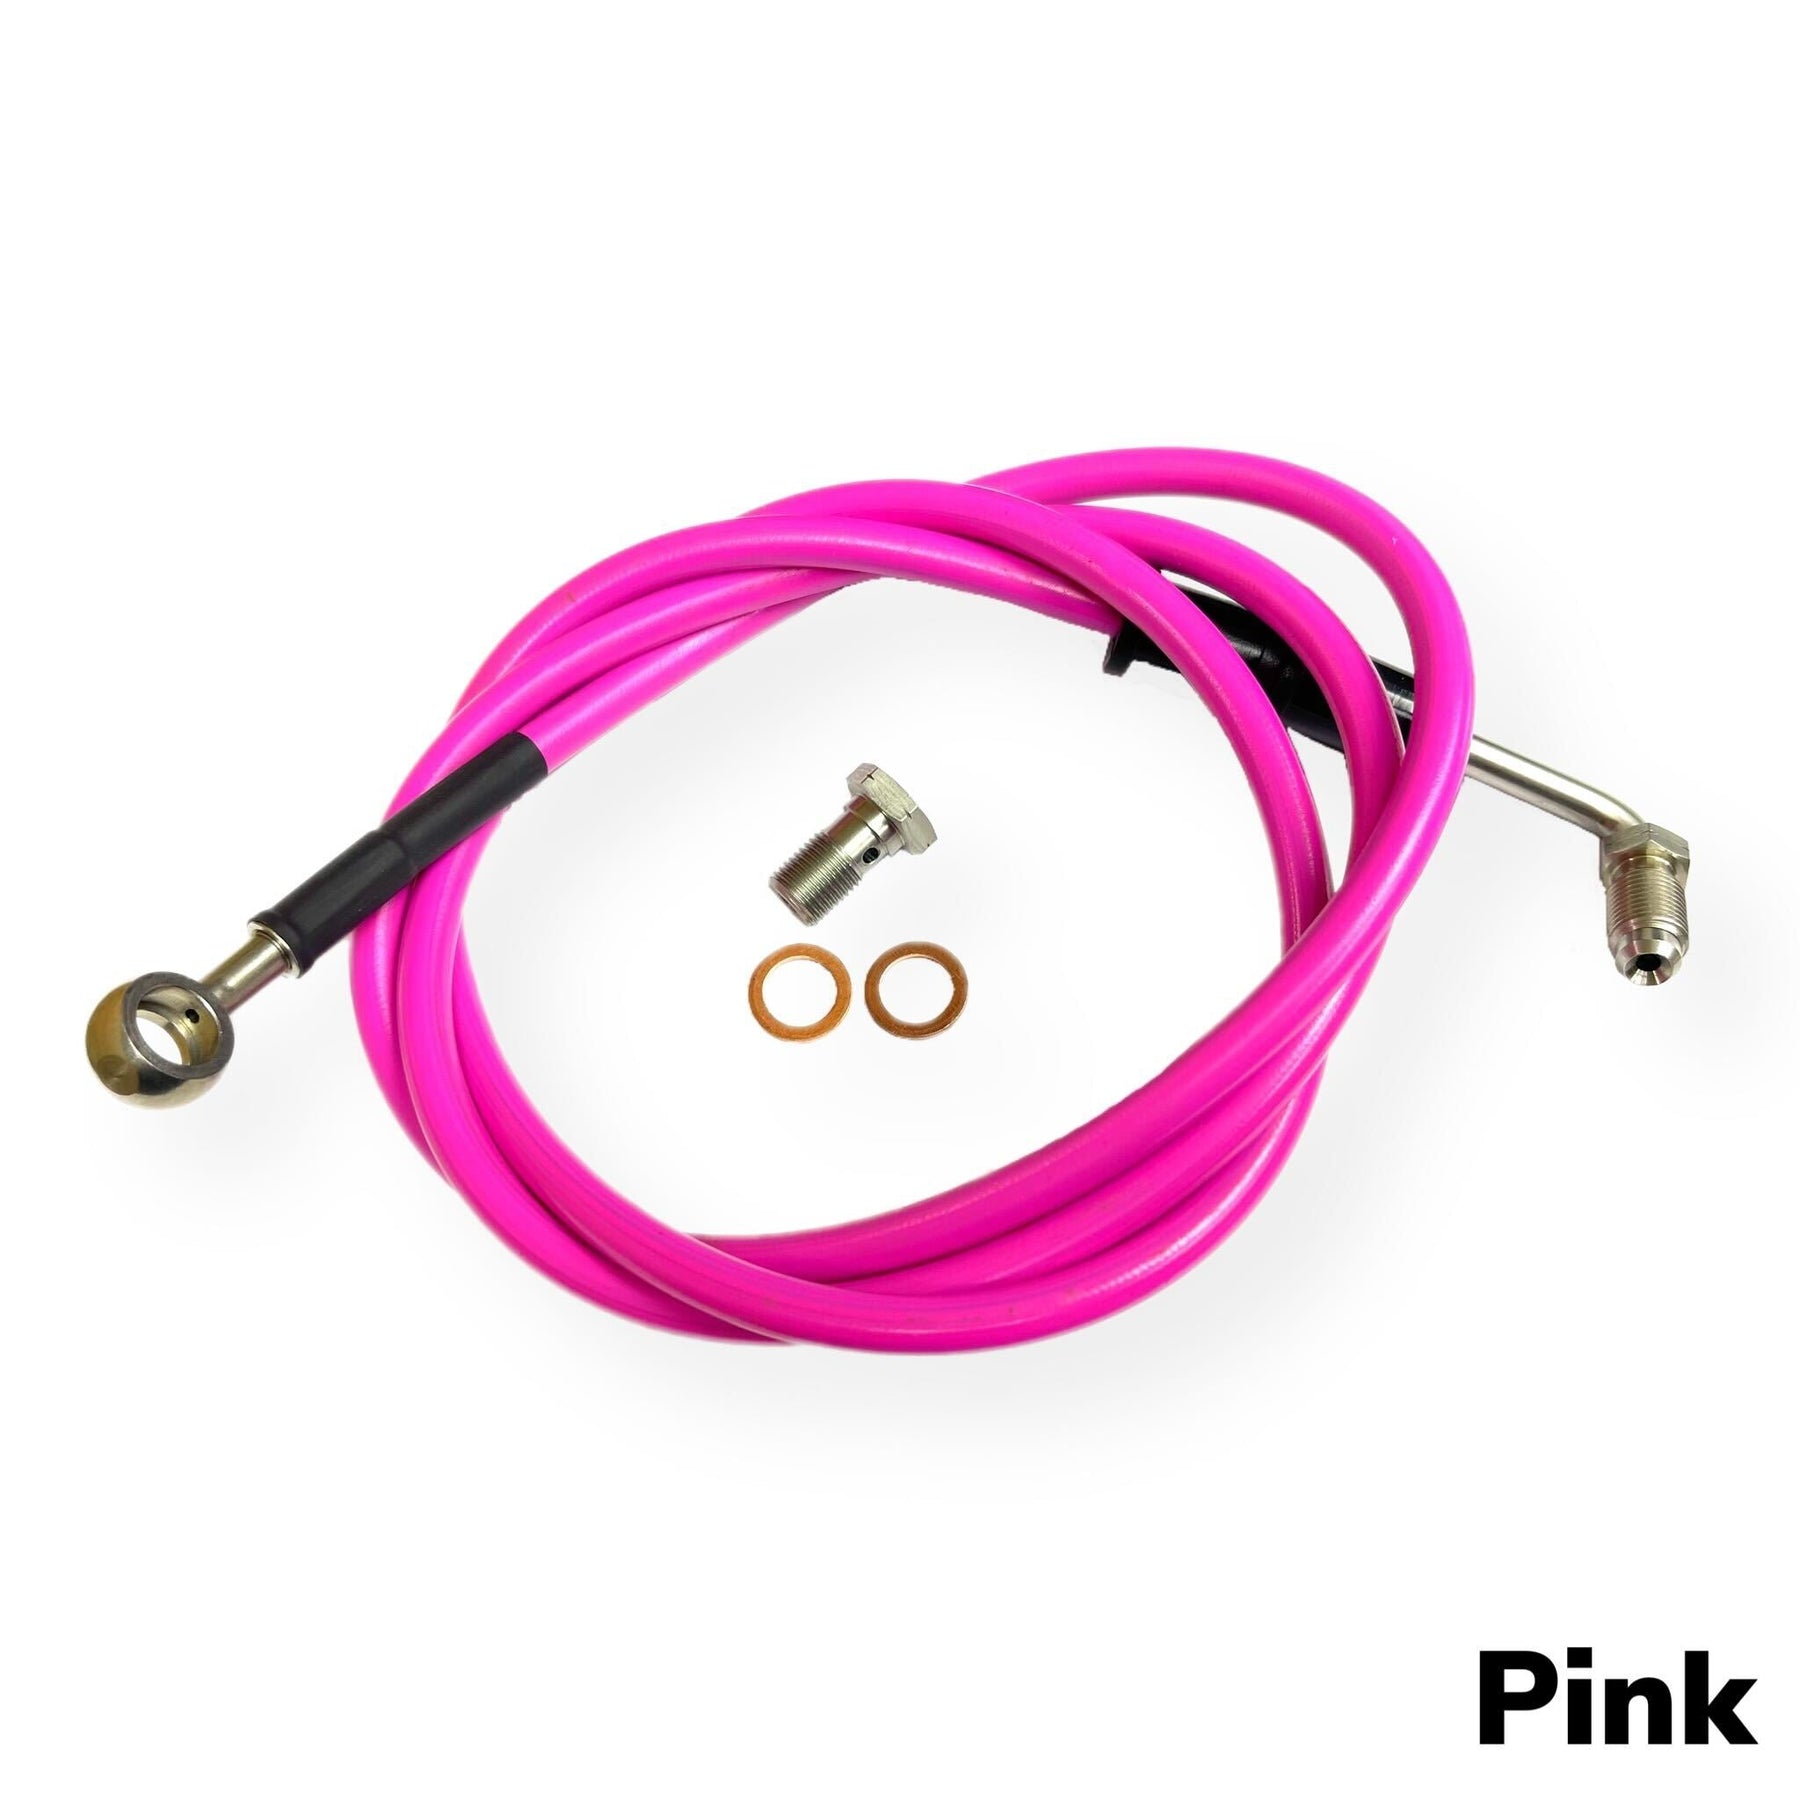 Vespa PX Disc LML HEL Stainless Hydraulic Front Brake Hose - Extended Version - 14 Colour Options